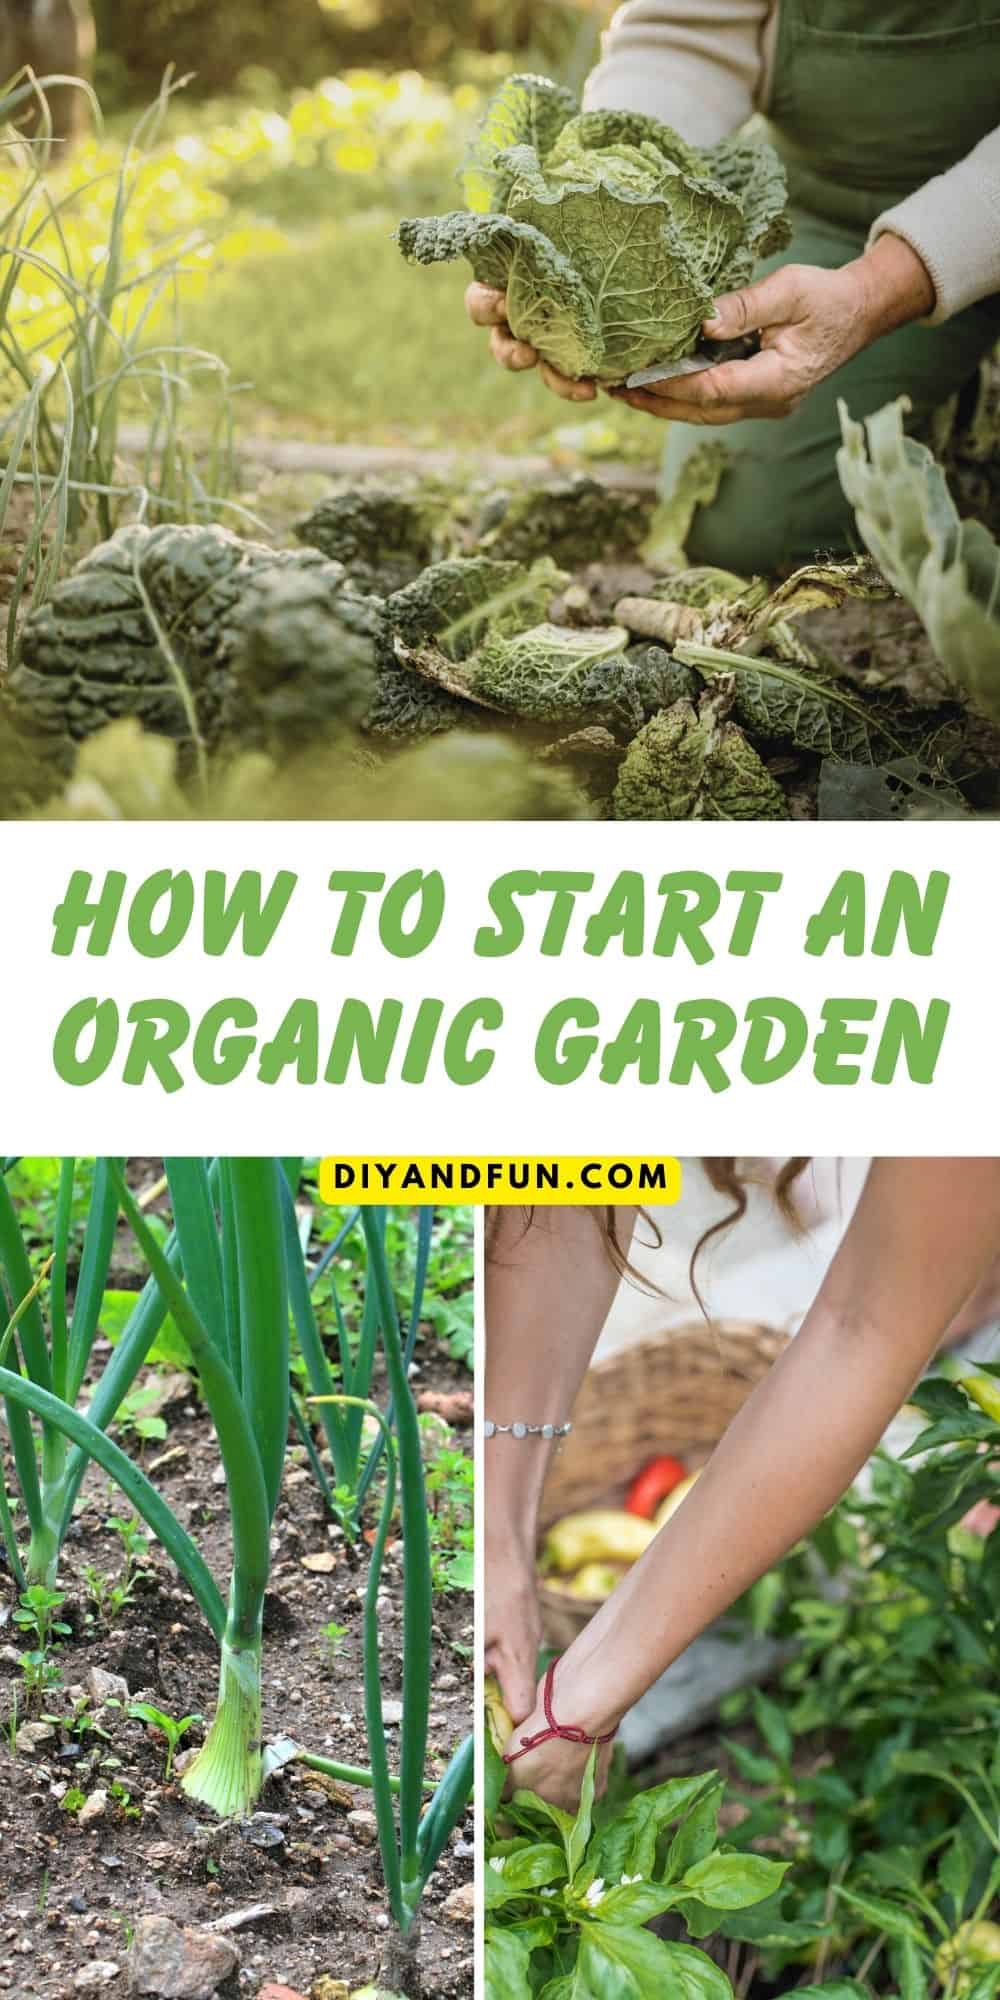 How to Start an Organic Garden, a beginners guide to preparing soil, choosing plants, and caring for plants in an organic garden.